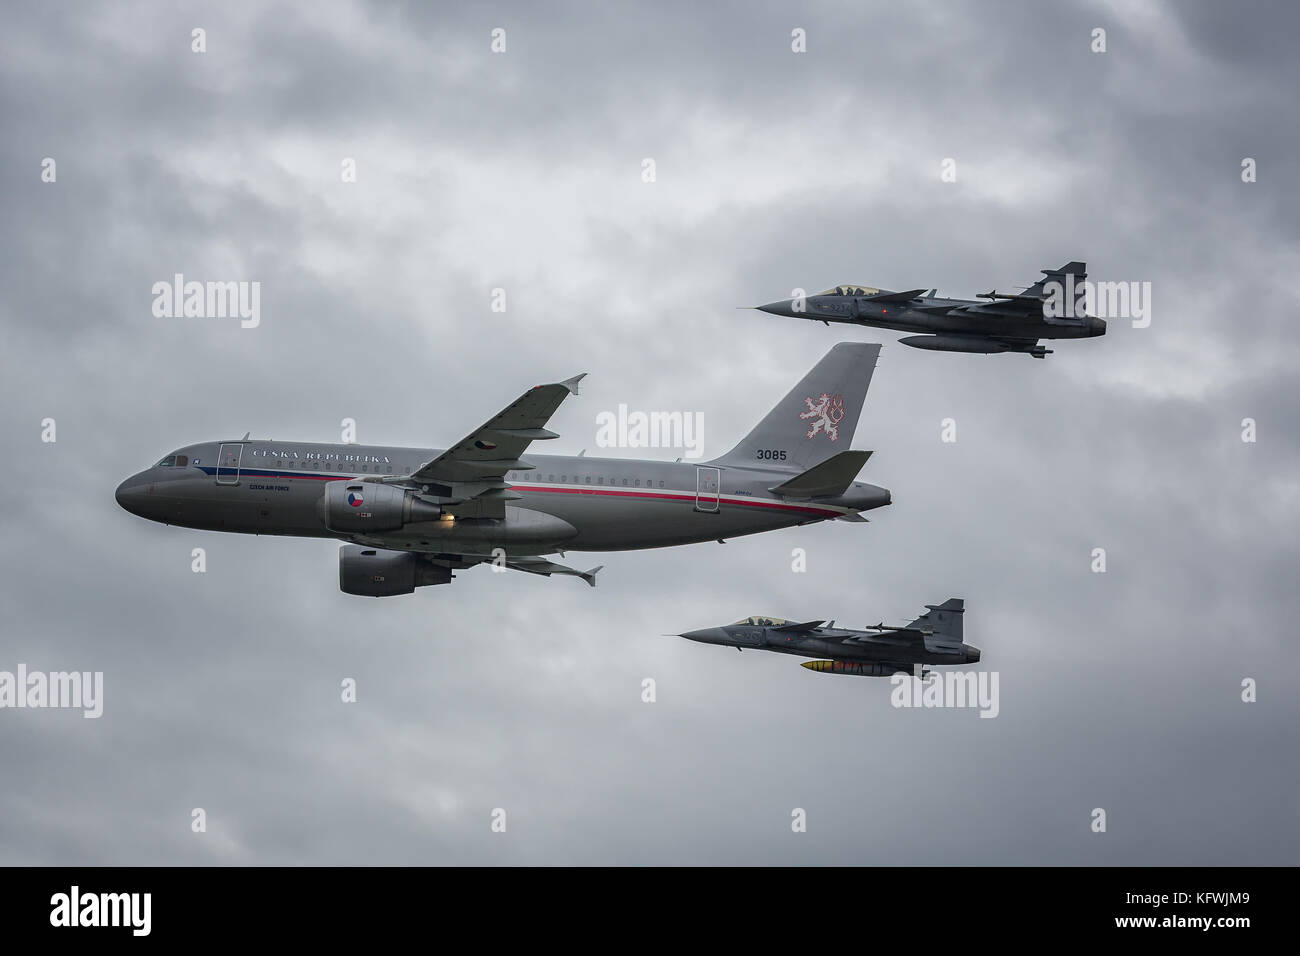 Czech Goverment aircraft escorted by two JAS 39 Gripens from the czech air force Stock Photo